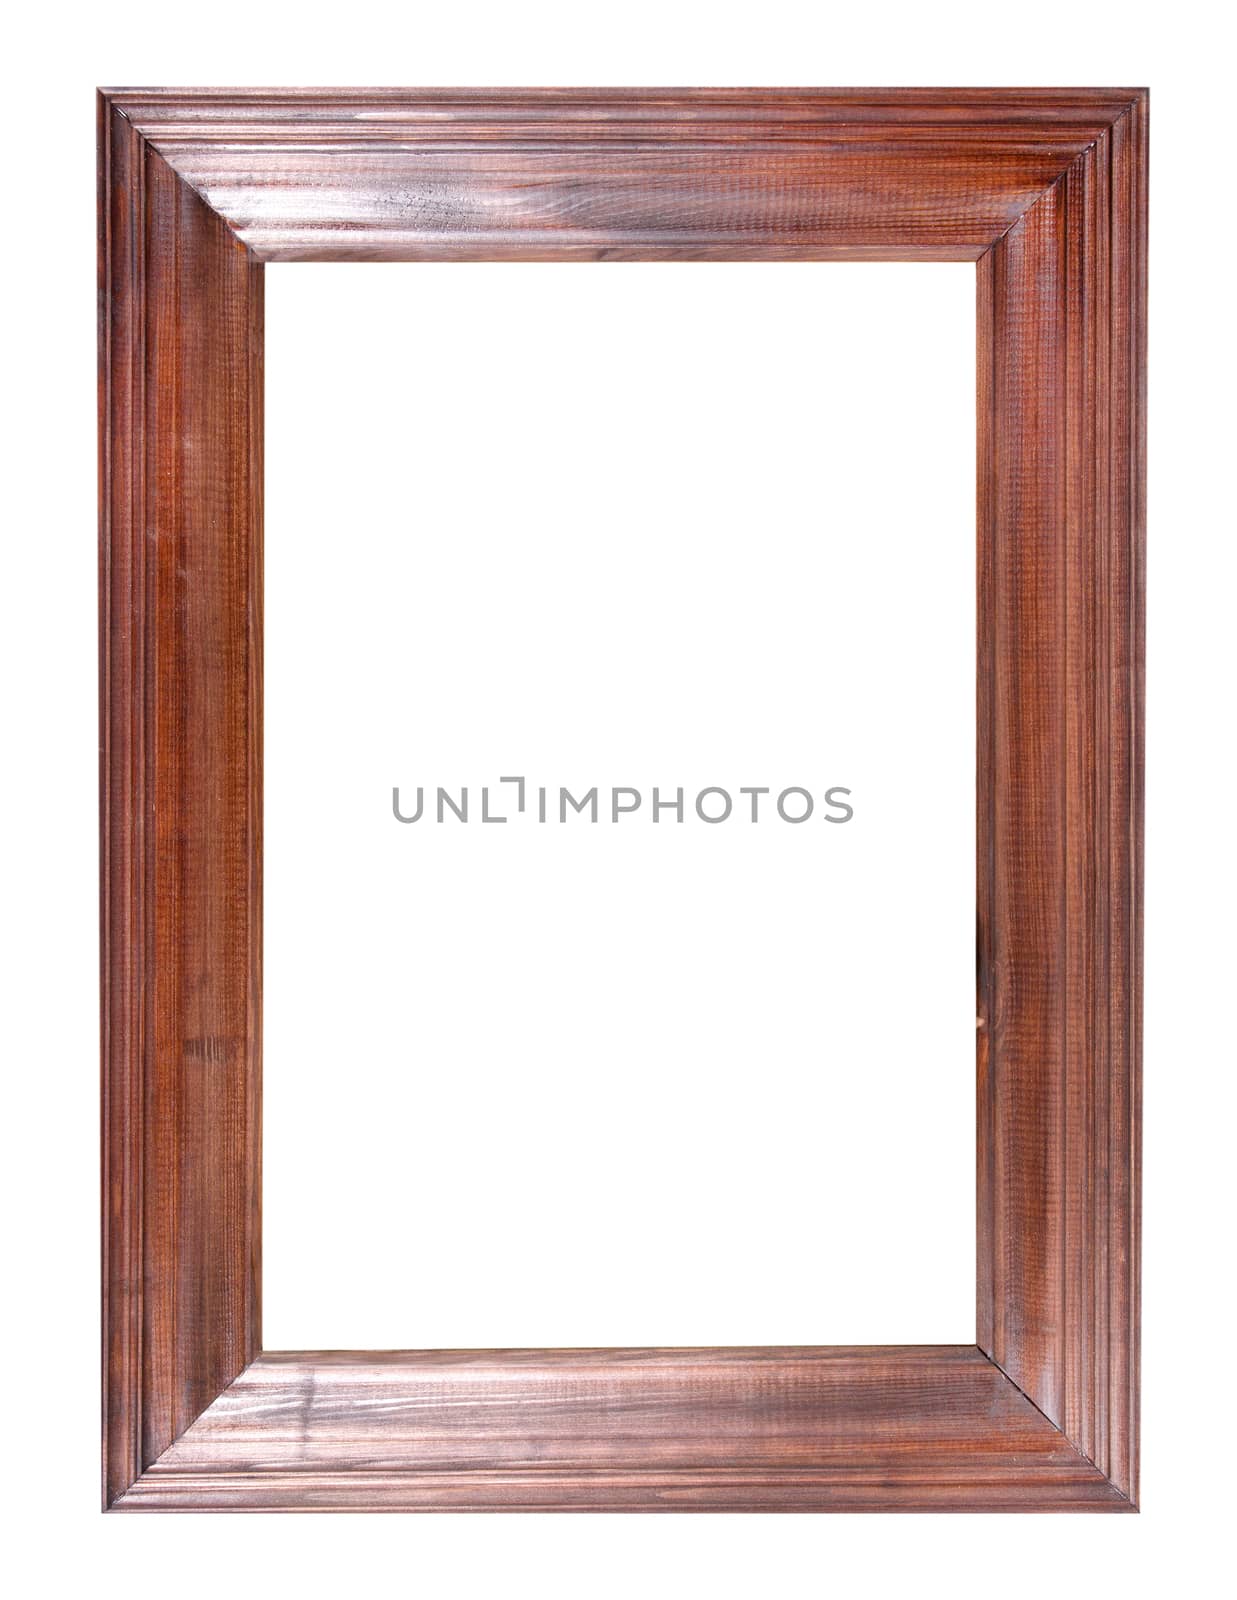 Old wooden framework. It is possible to insert a photo into them